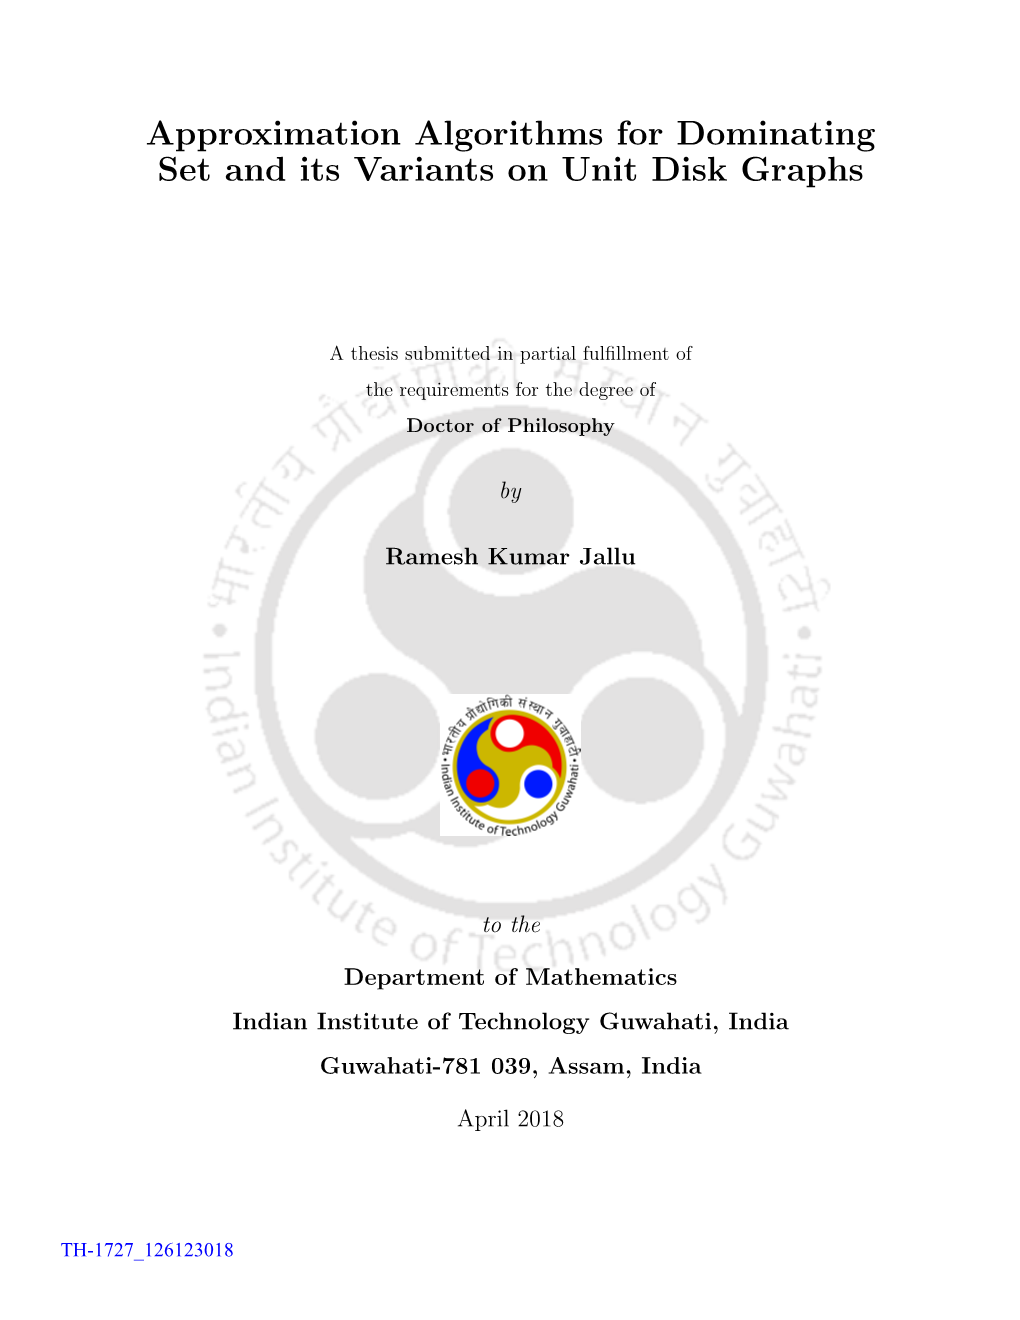 Approximation Algorithms for Dominating Set and Its Variants on Unit Disk Graphs